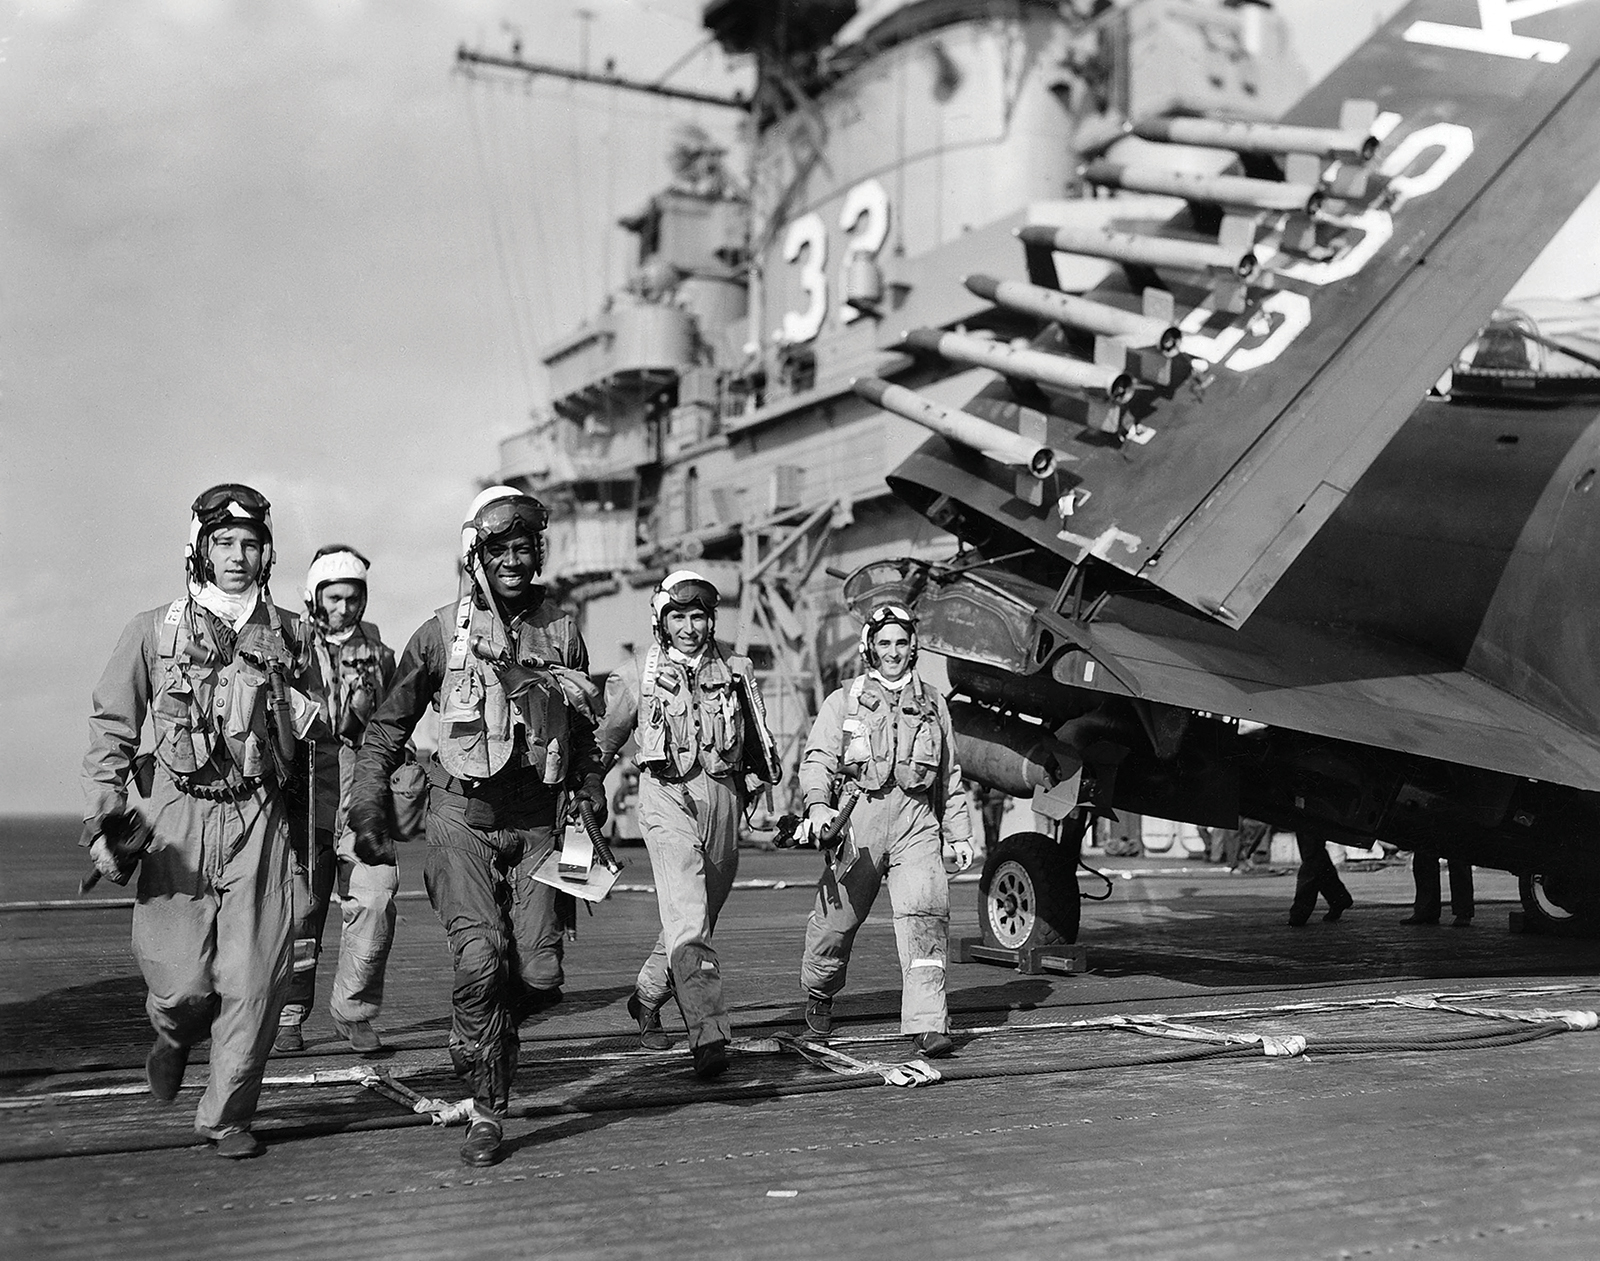 Ensign Jesse L. Brown, the first African-American naval aviator, walking with his cremates aboard the USS Leyte during the Korean War. (photo via Bryan Makos)